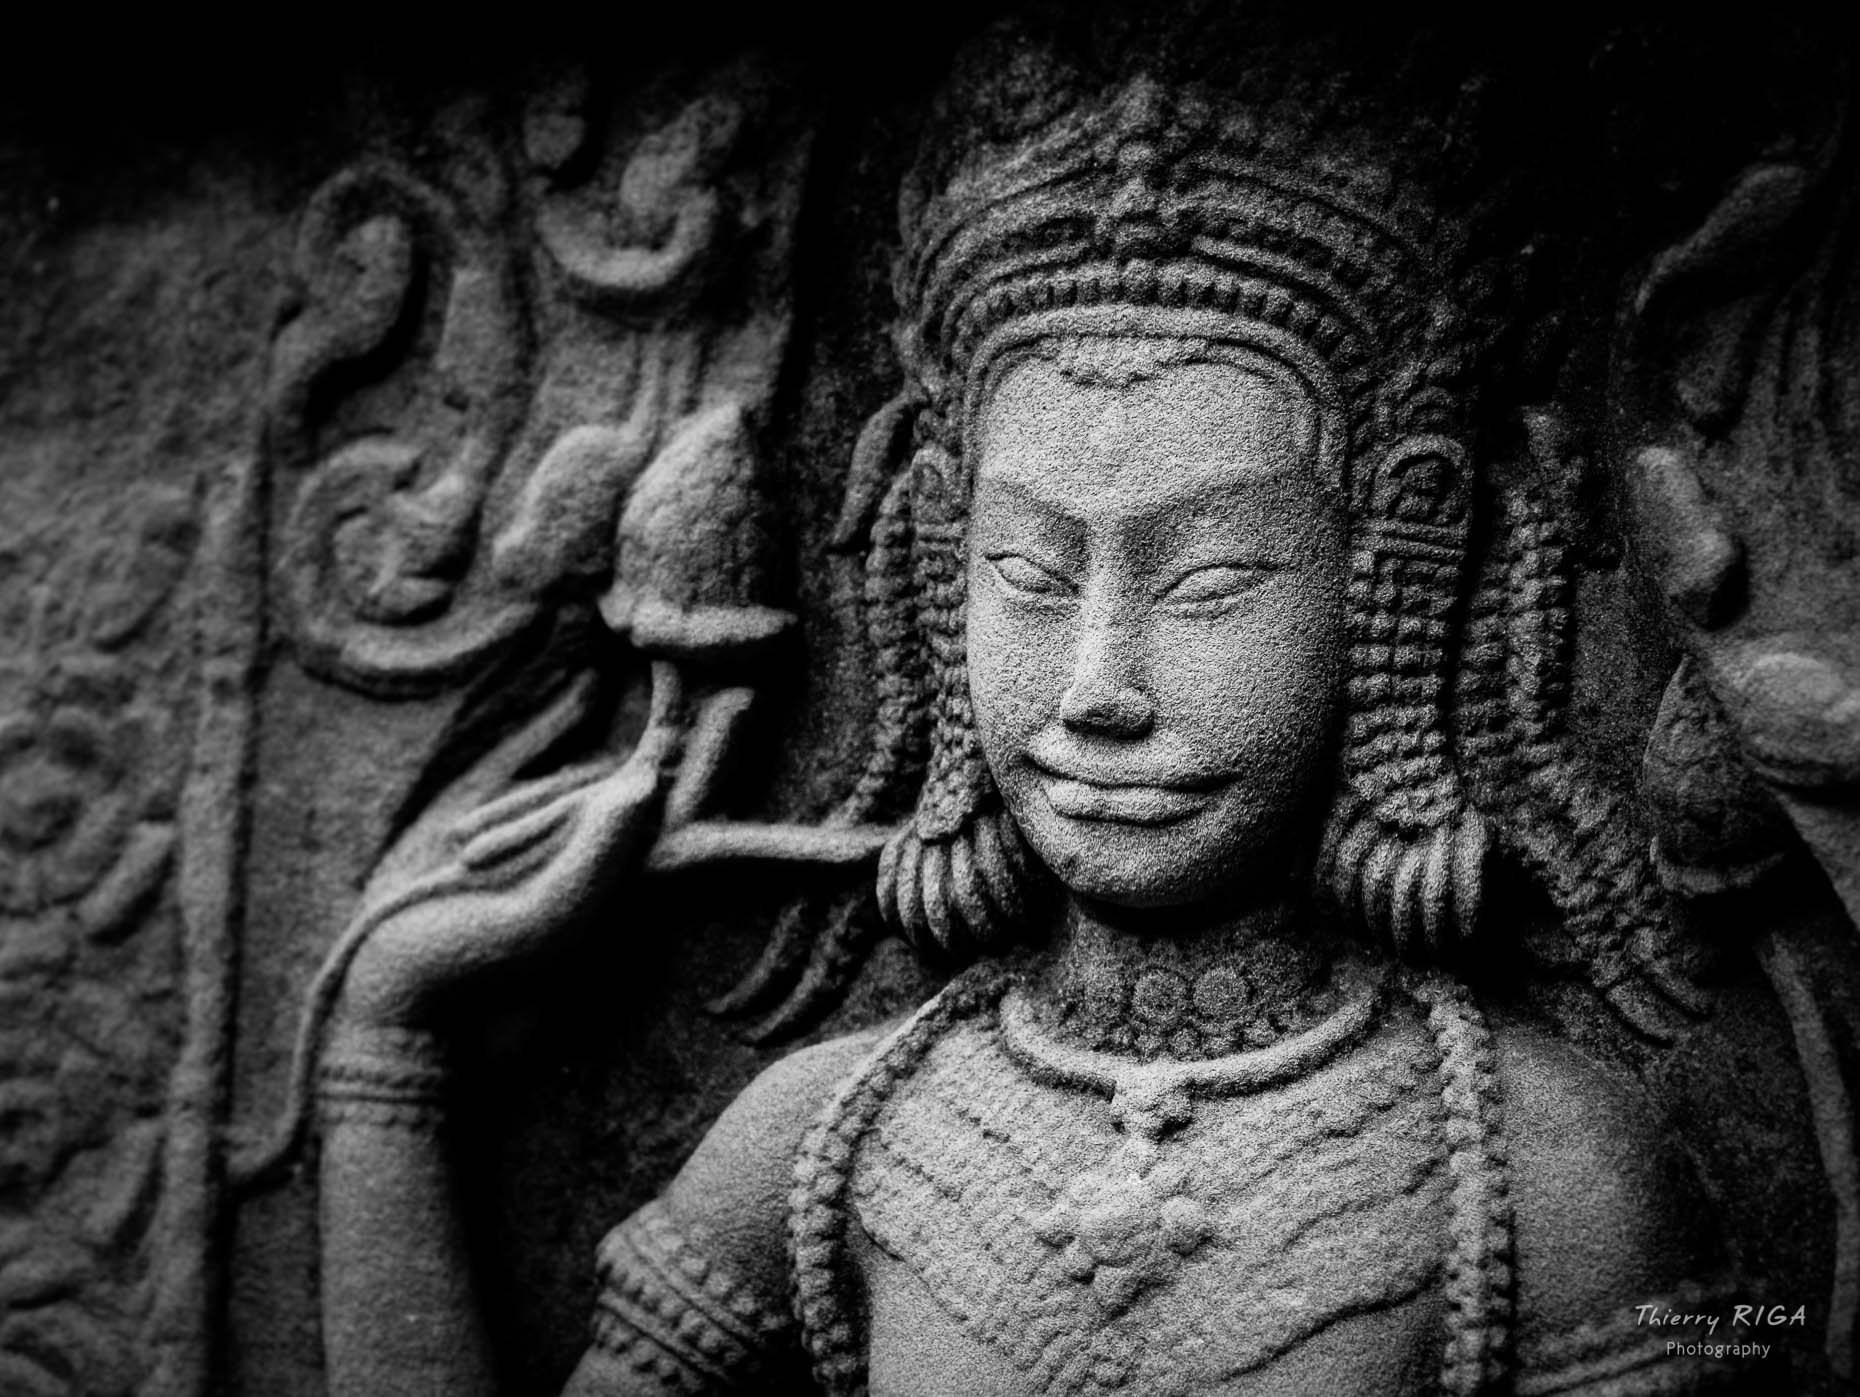 Devata carving in one of the temples of Angkor, Thierry Riga, Angkor Photography